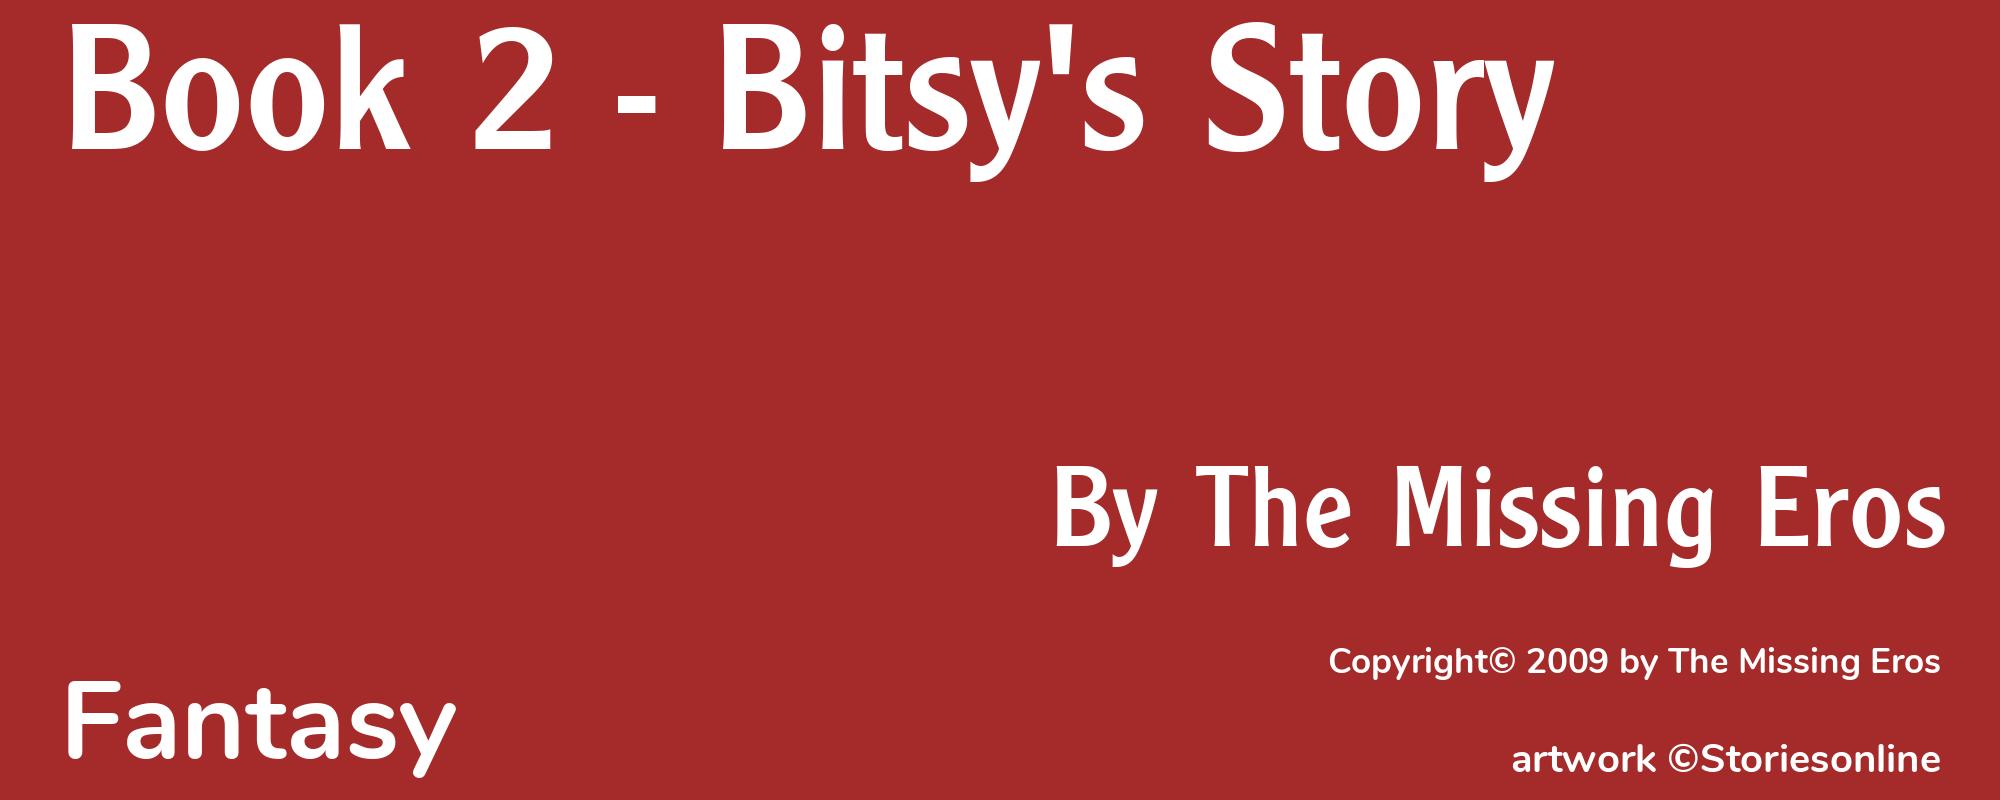 Book 2 - Bitsy's Story - Cover